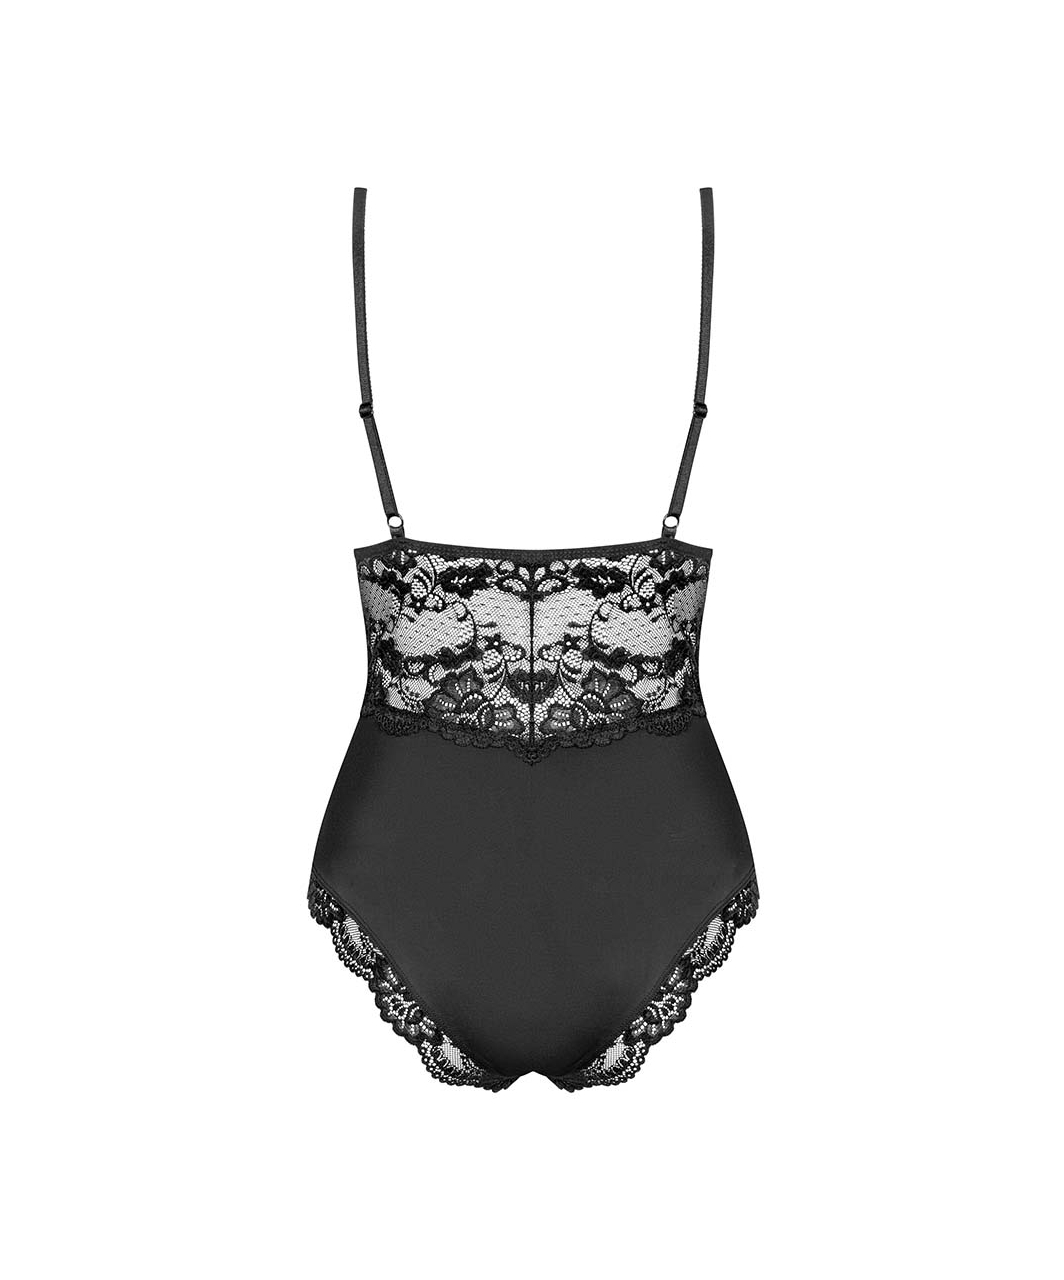 Obsessive black bodysuit with lace inserts